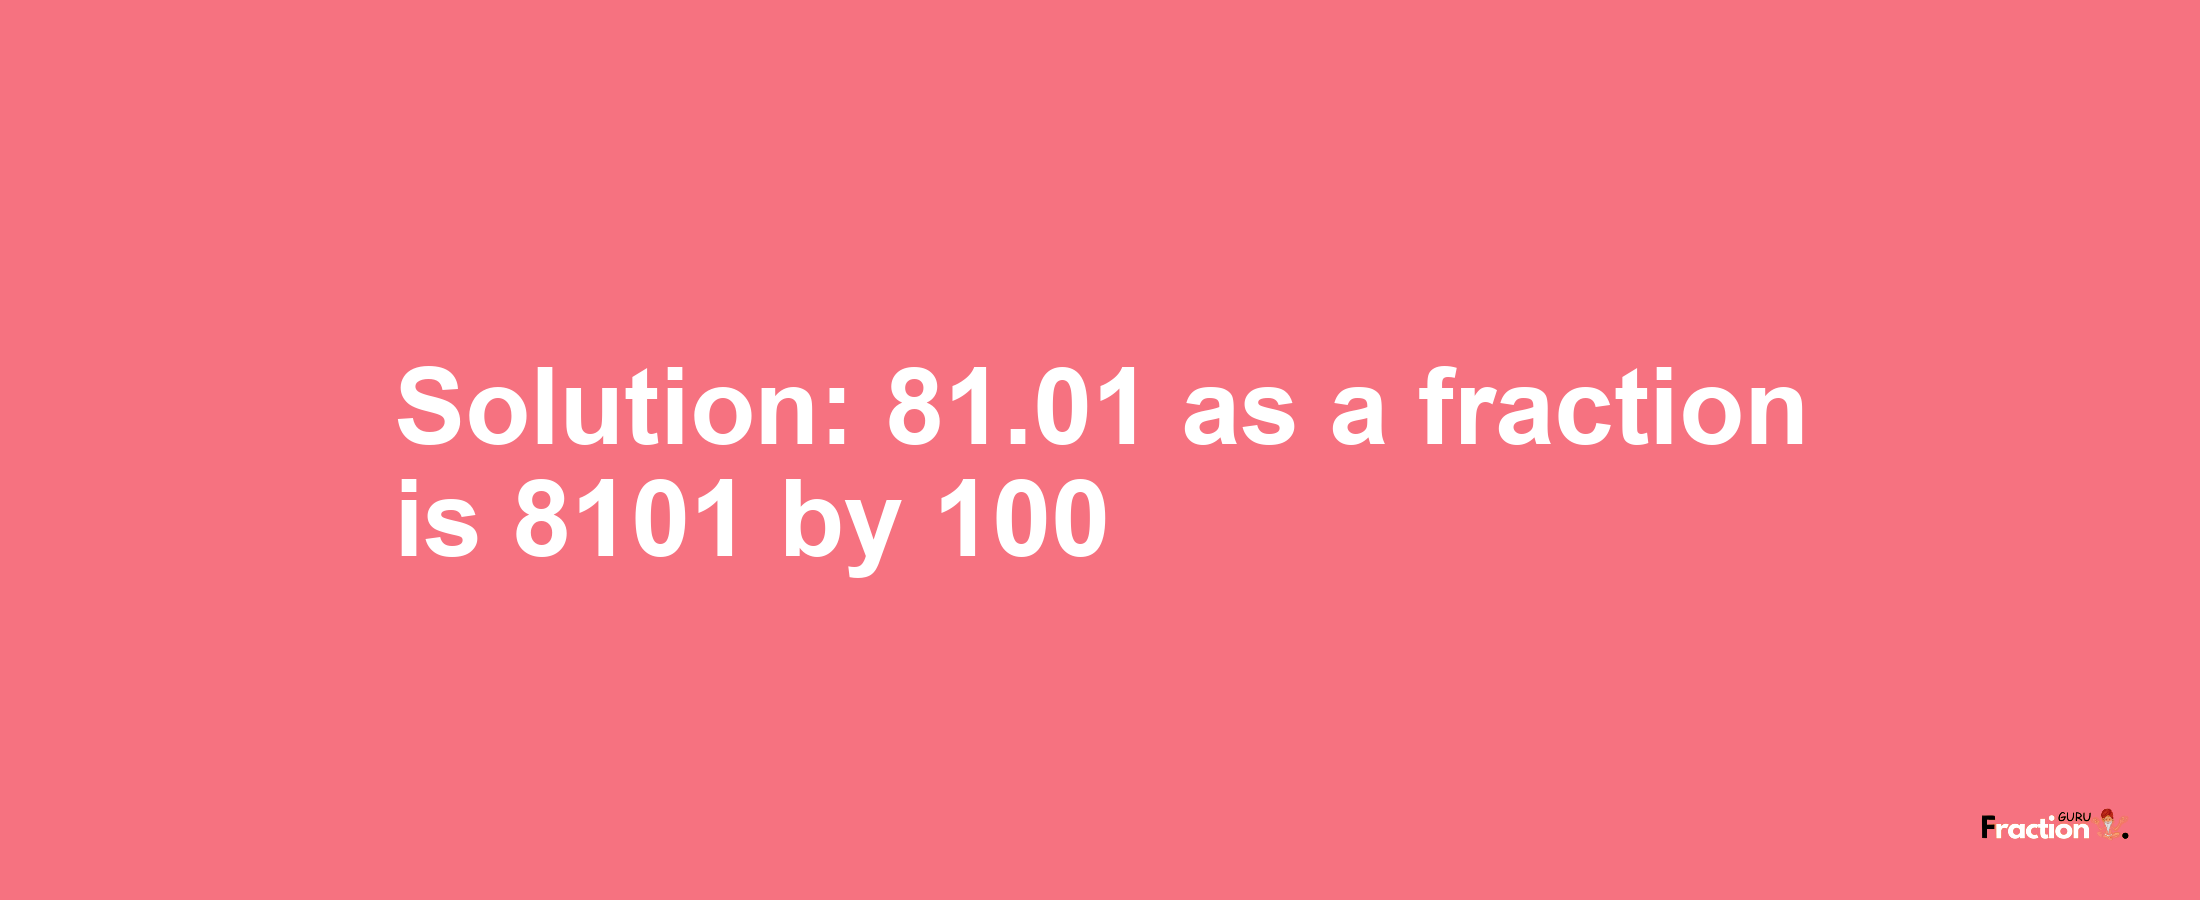 Solution:81.01 as a fraction is 8101/100